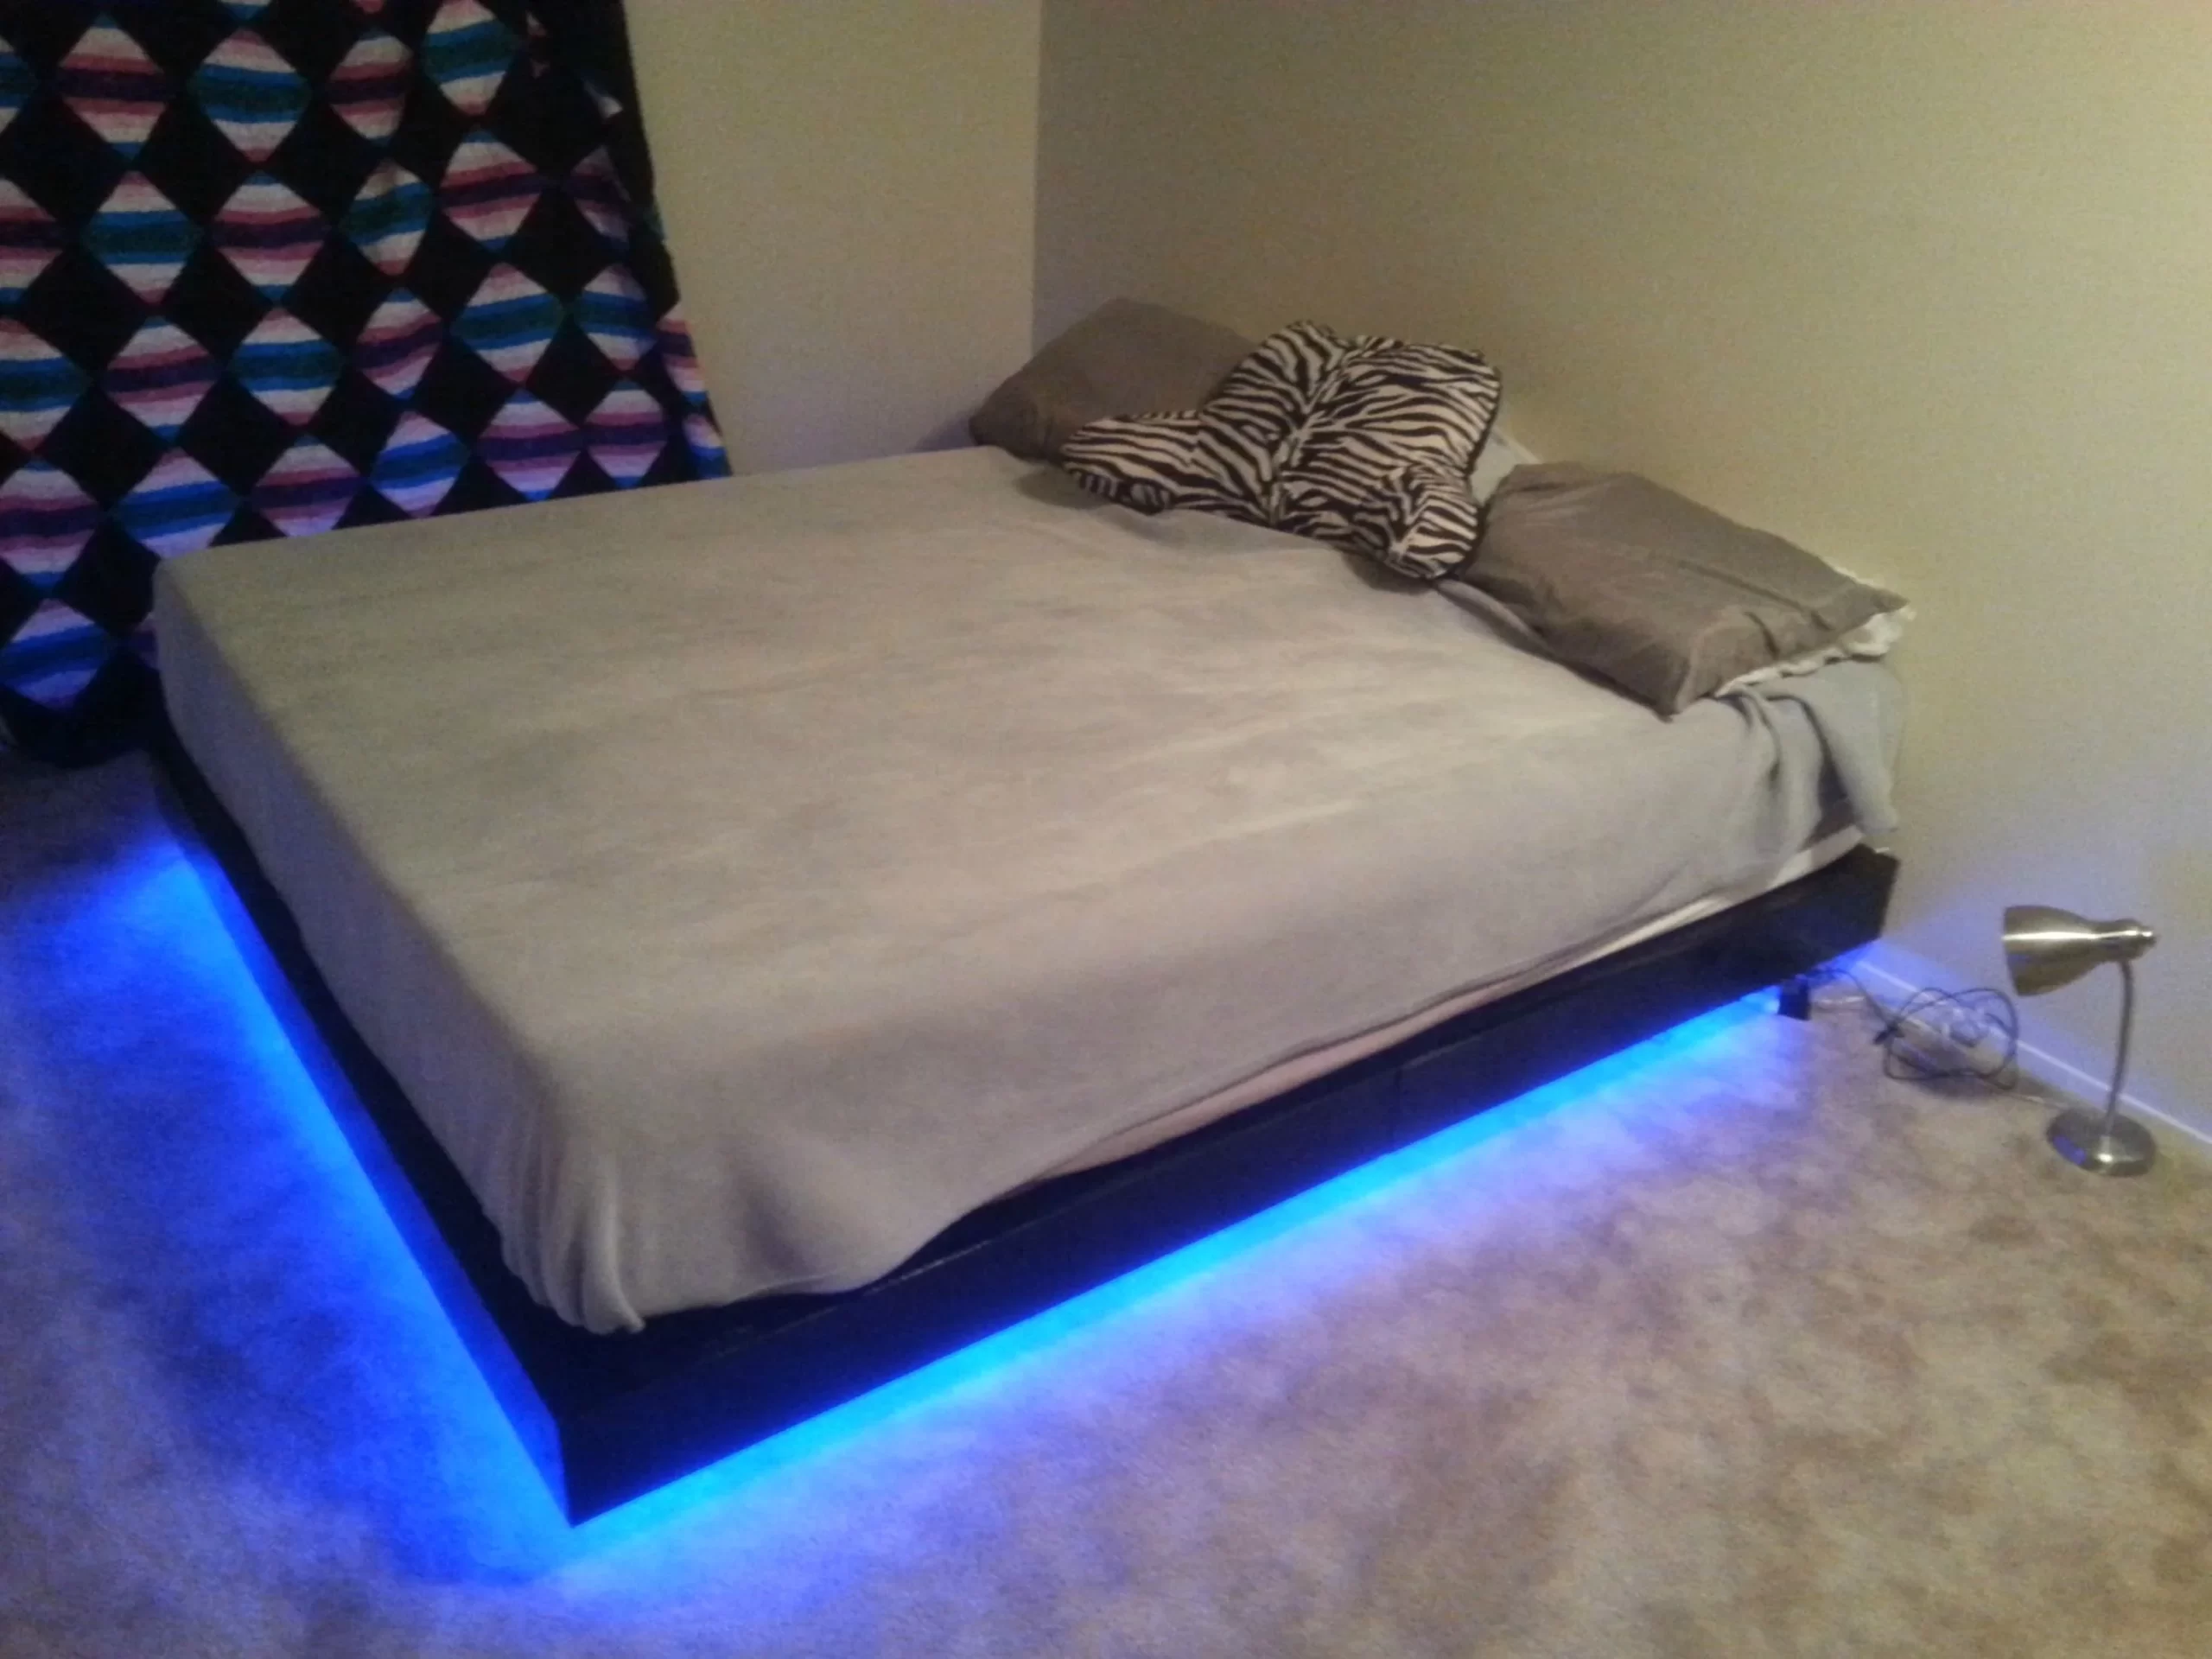 How to Put LED Lights Under the Bed